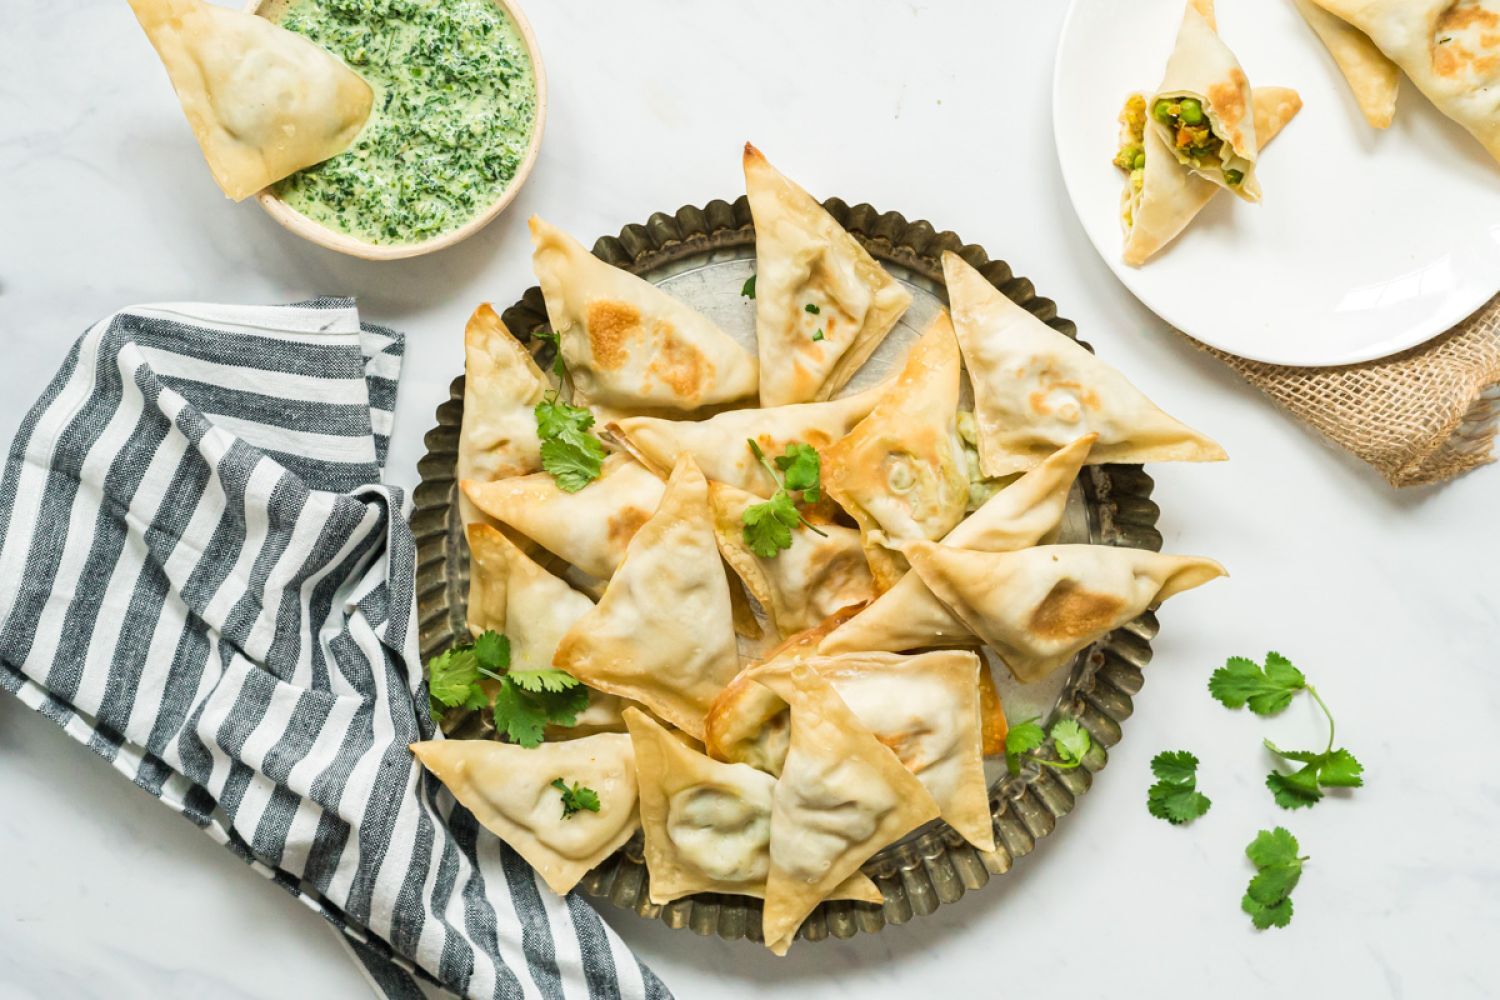 Baked samosa filled with potato, cauliflower, and peas on a plate with cilantro and mint dipping sauce.